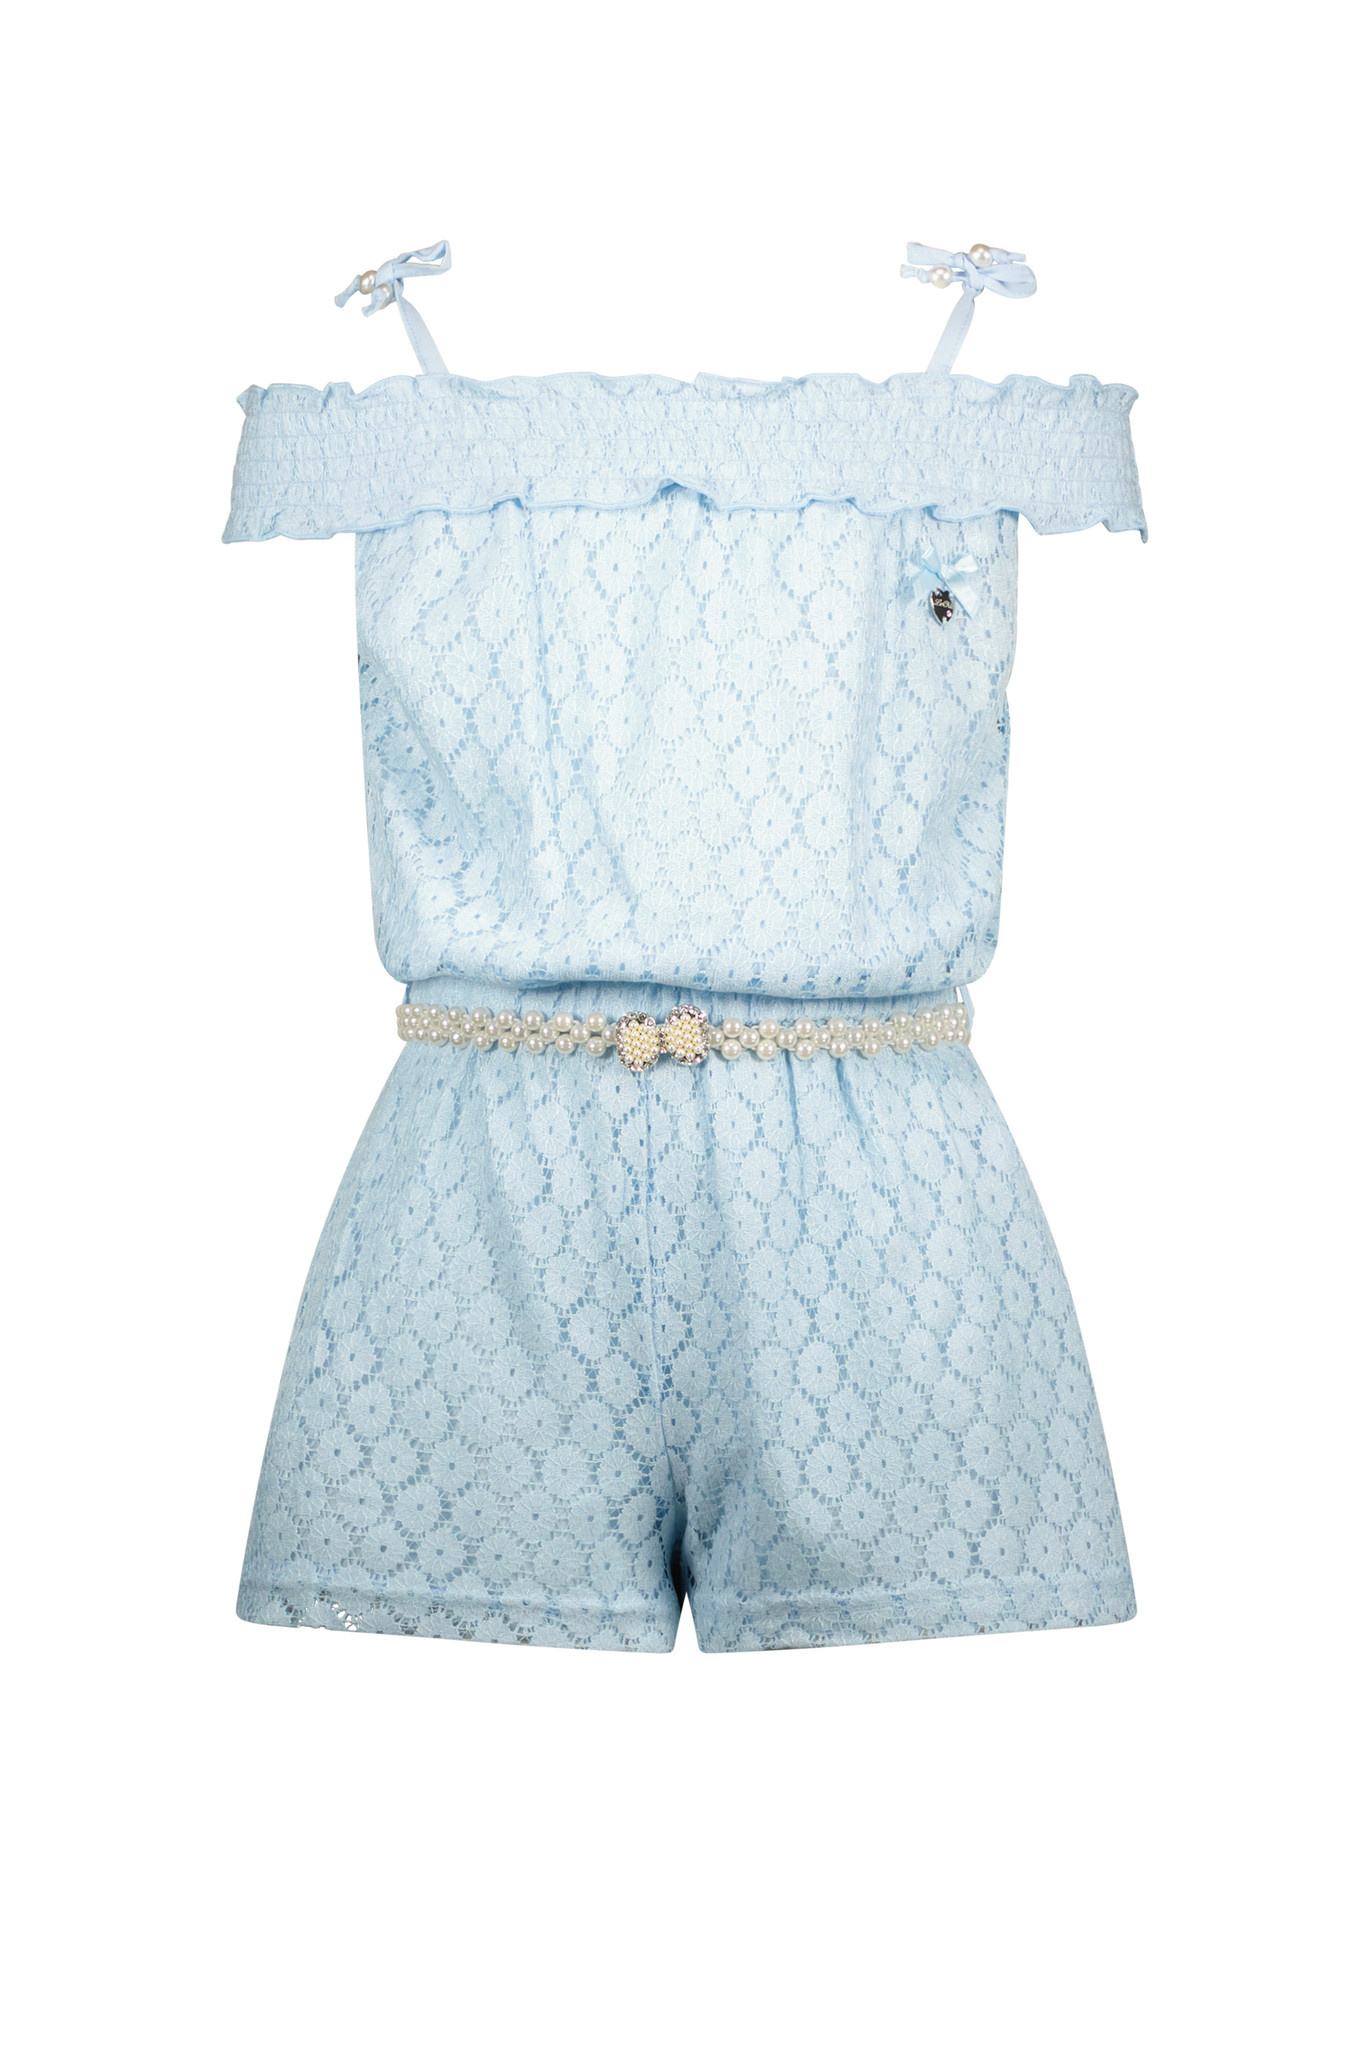 Le Chic Meisjes jumpsuit - Khlay - Song sung blauw